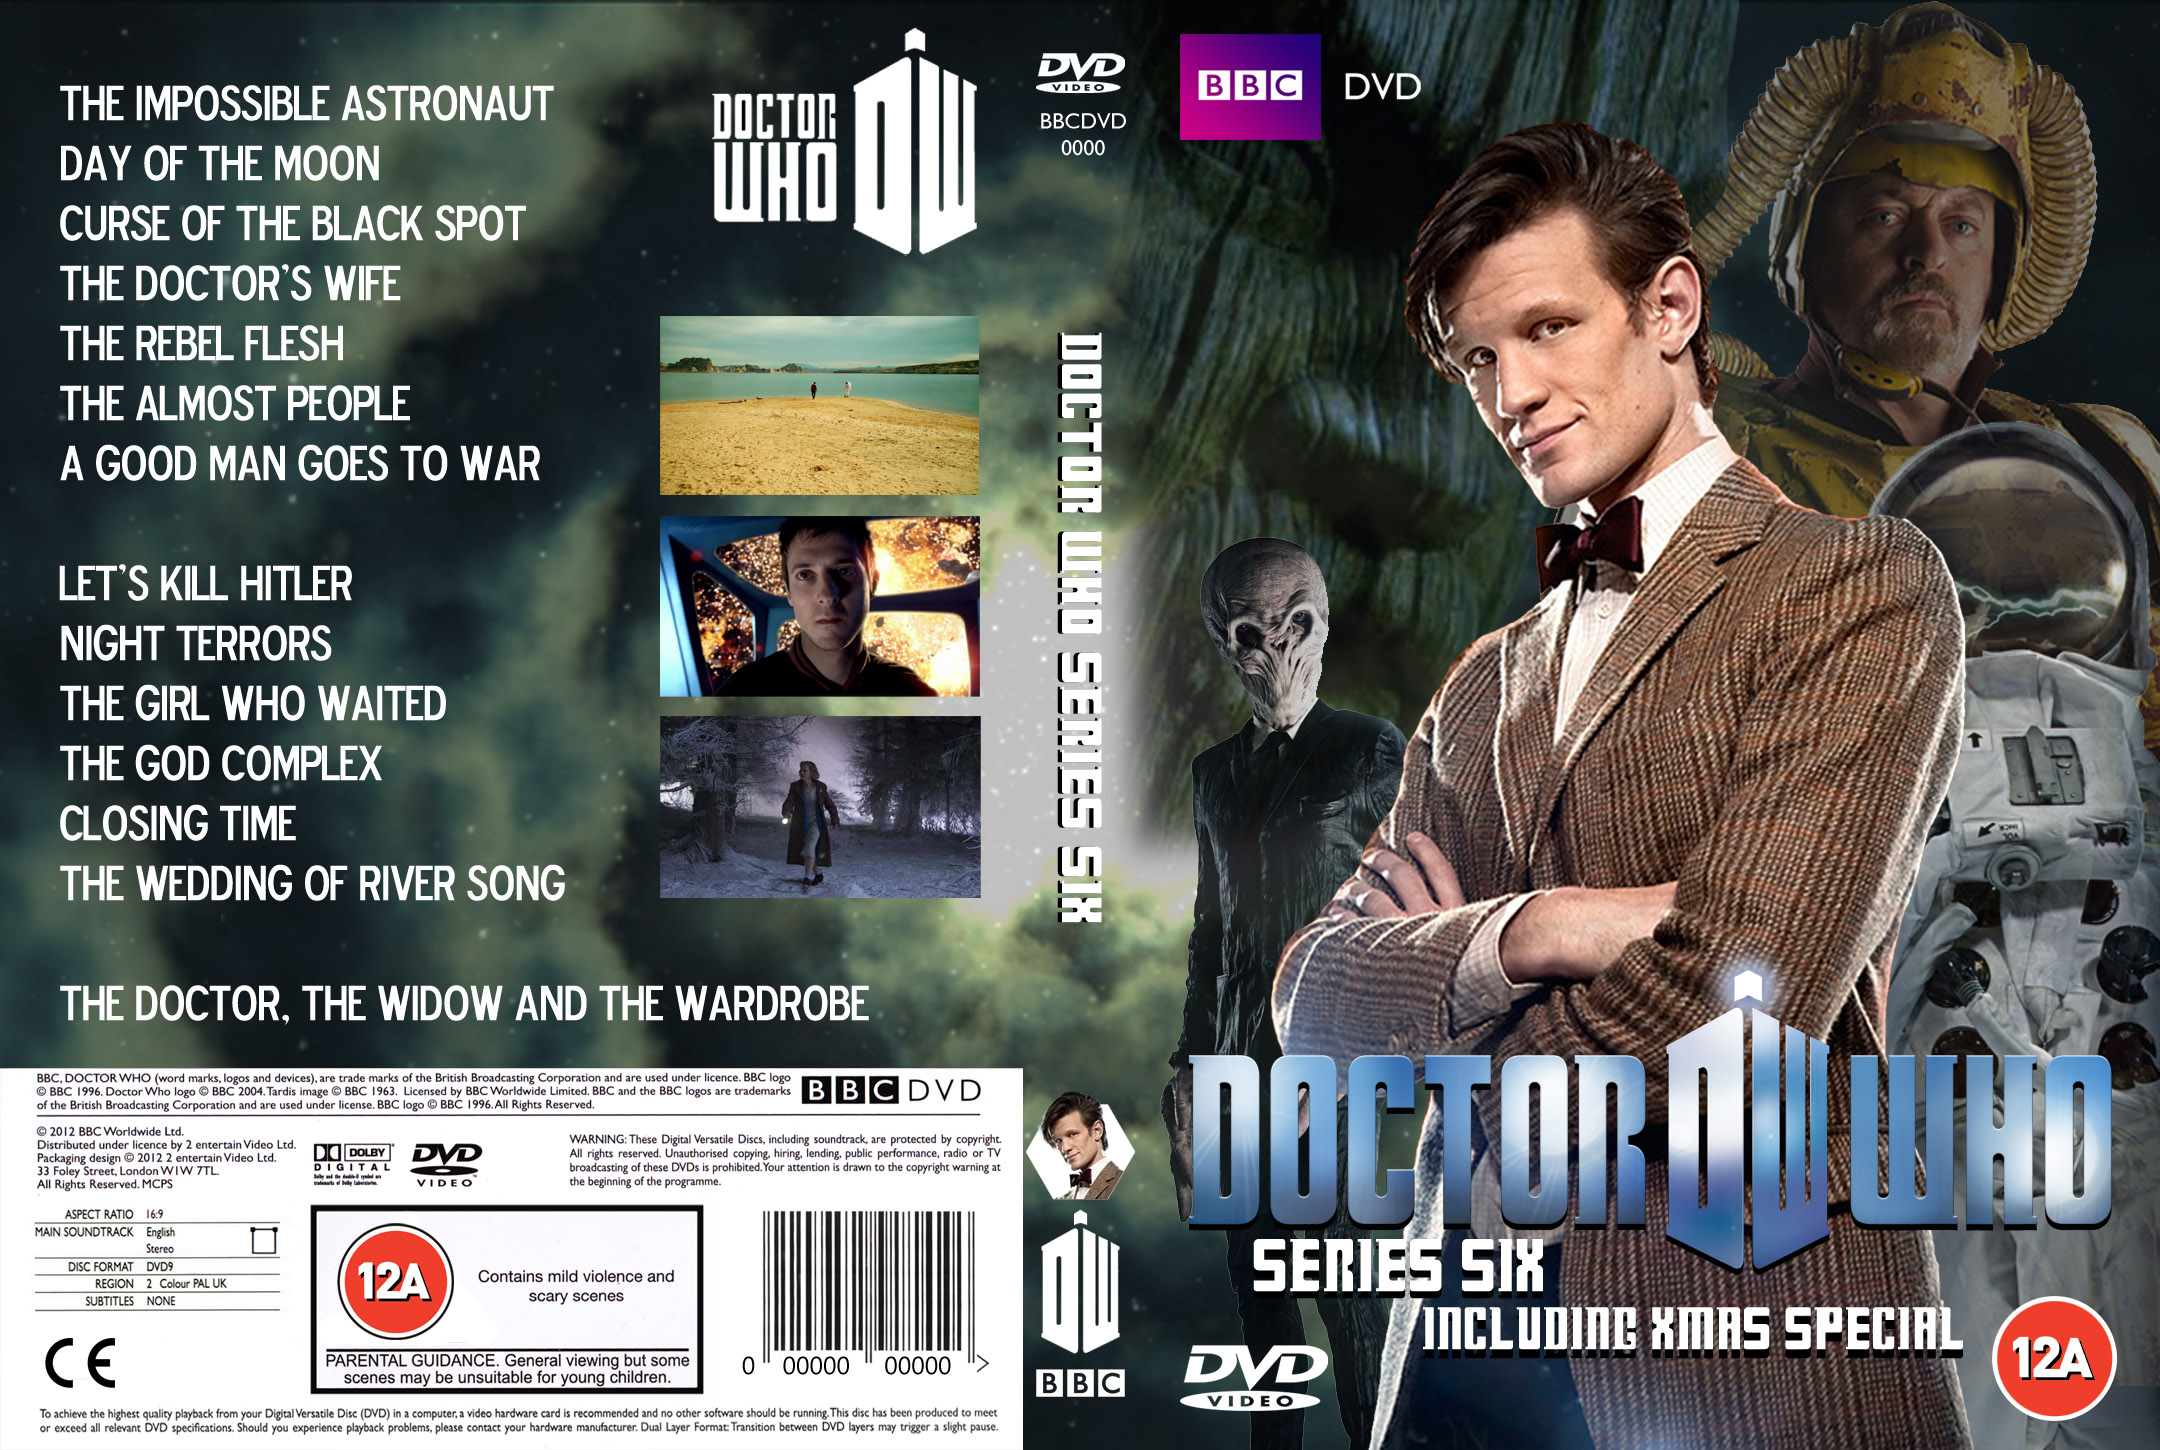 Doctor Who Series 6 DVD Cover (Custom) by OliverGeary on DeviantArt